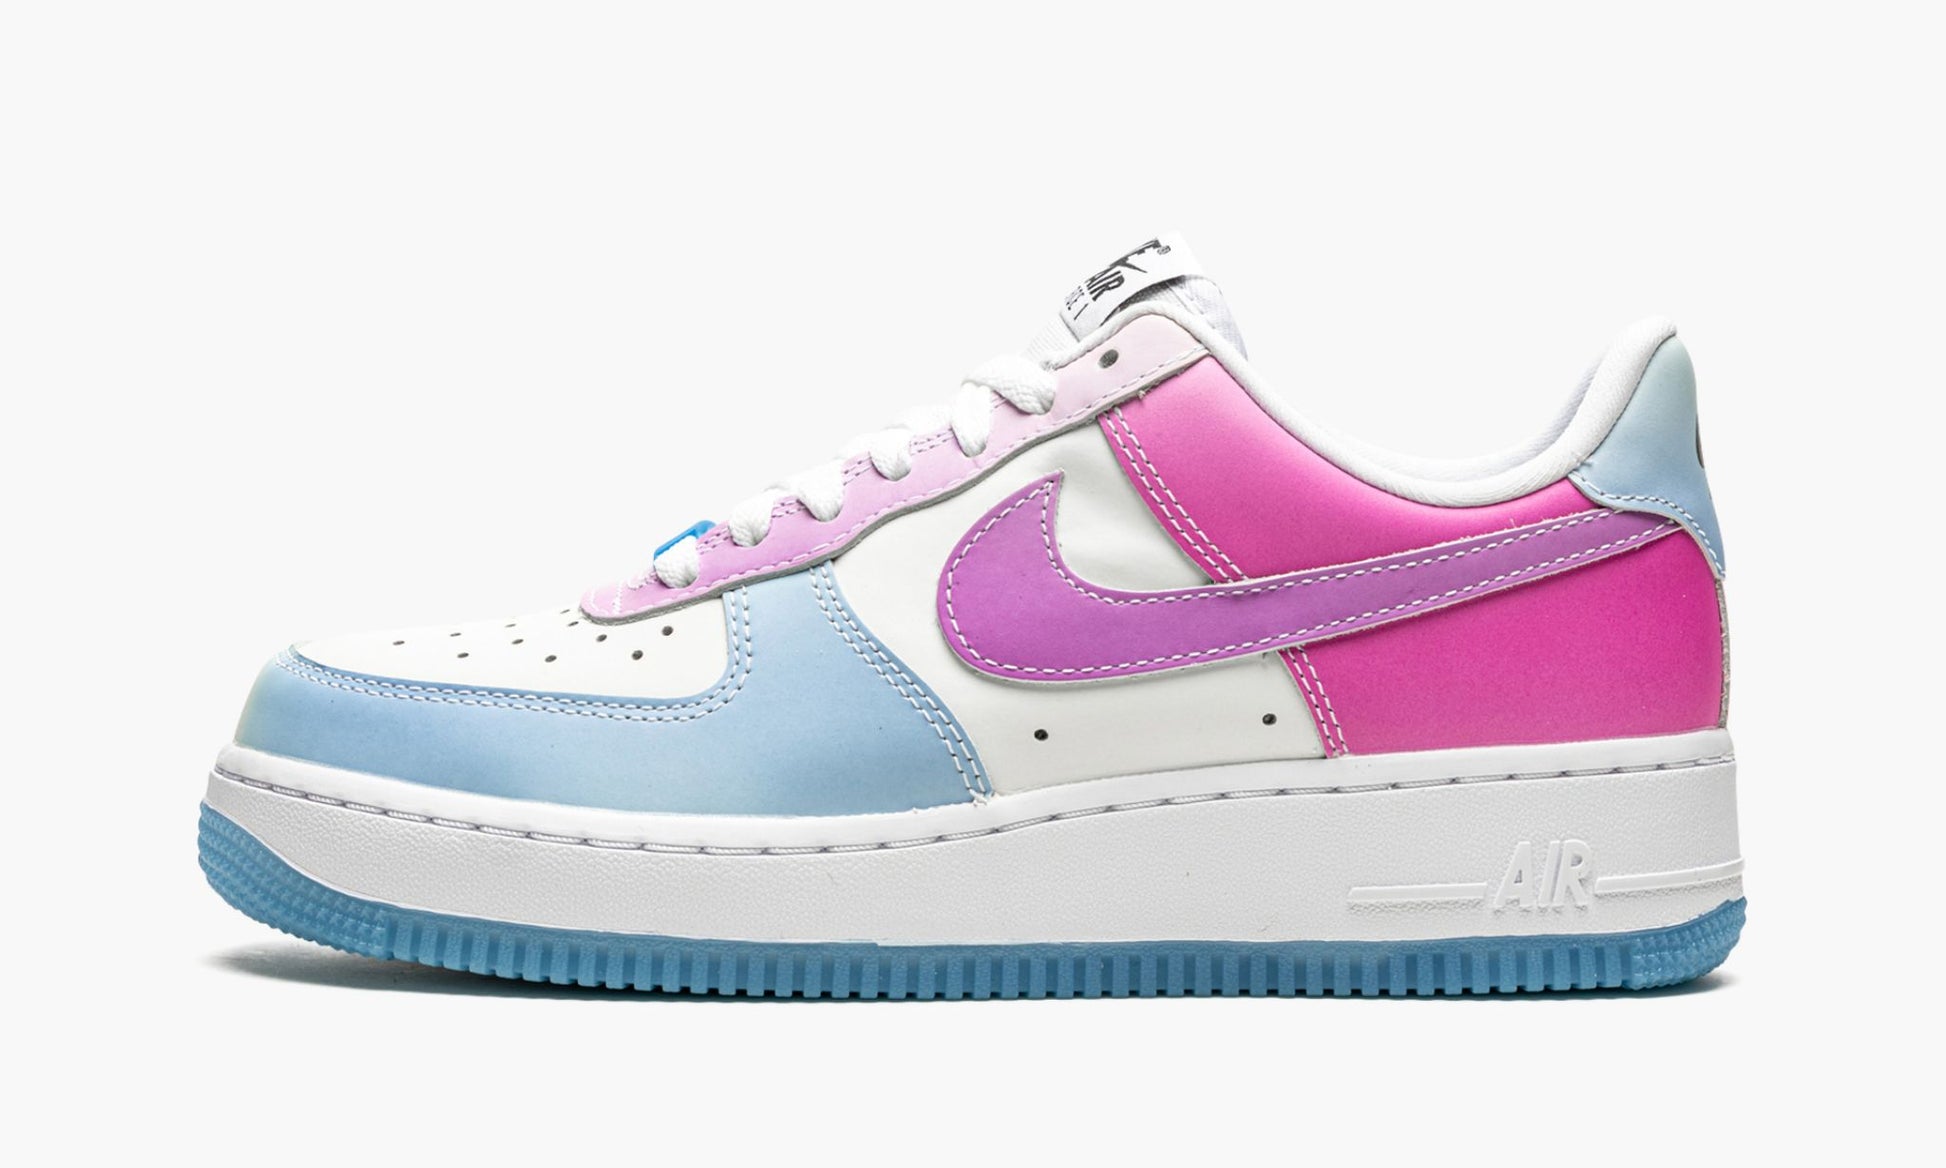 WMNS Air Force 1 Low LX "UV Reactive"